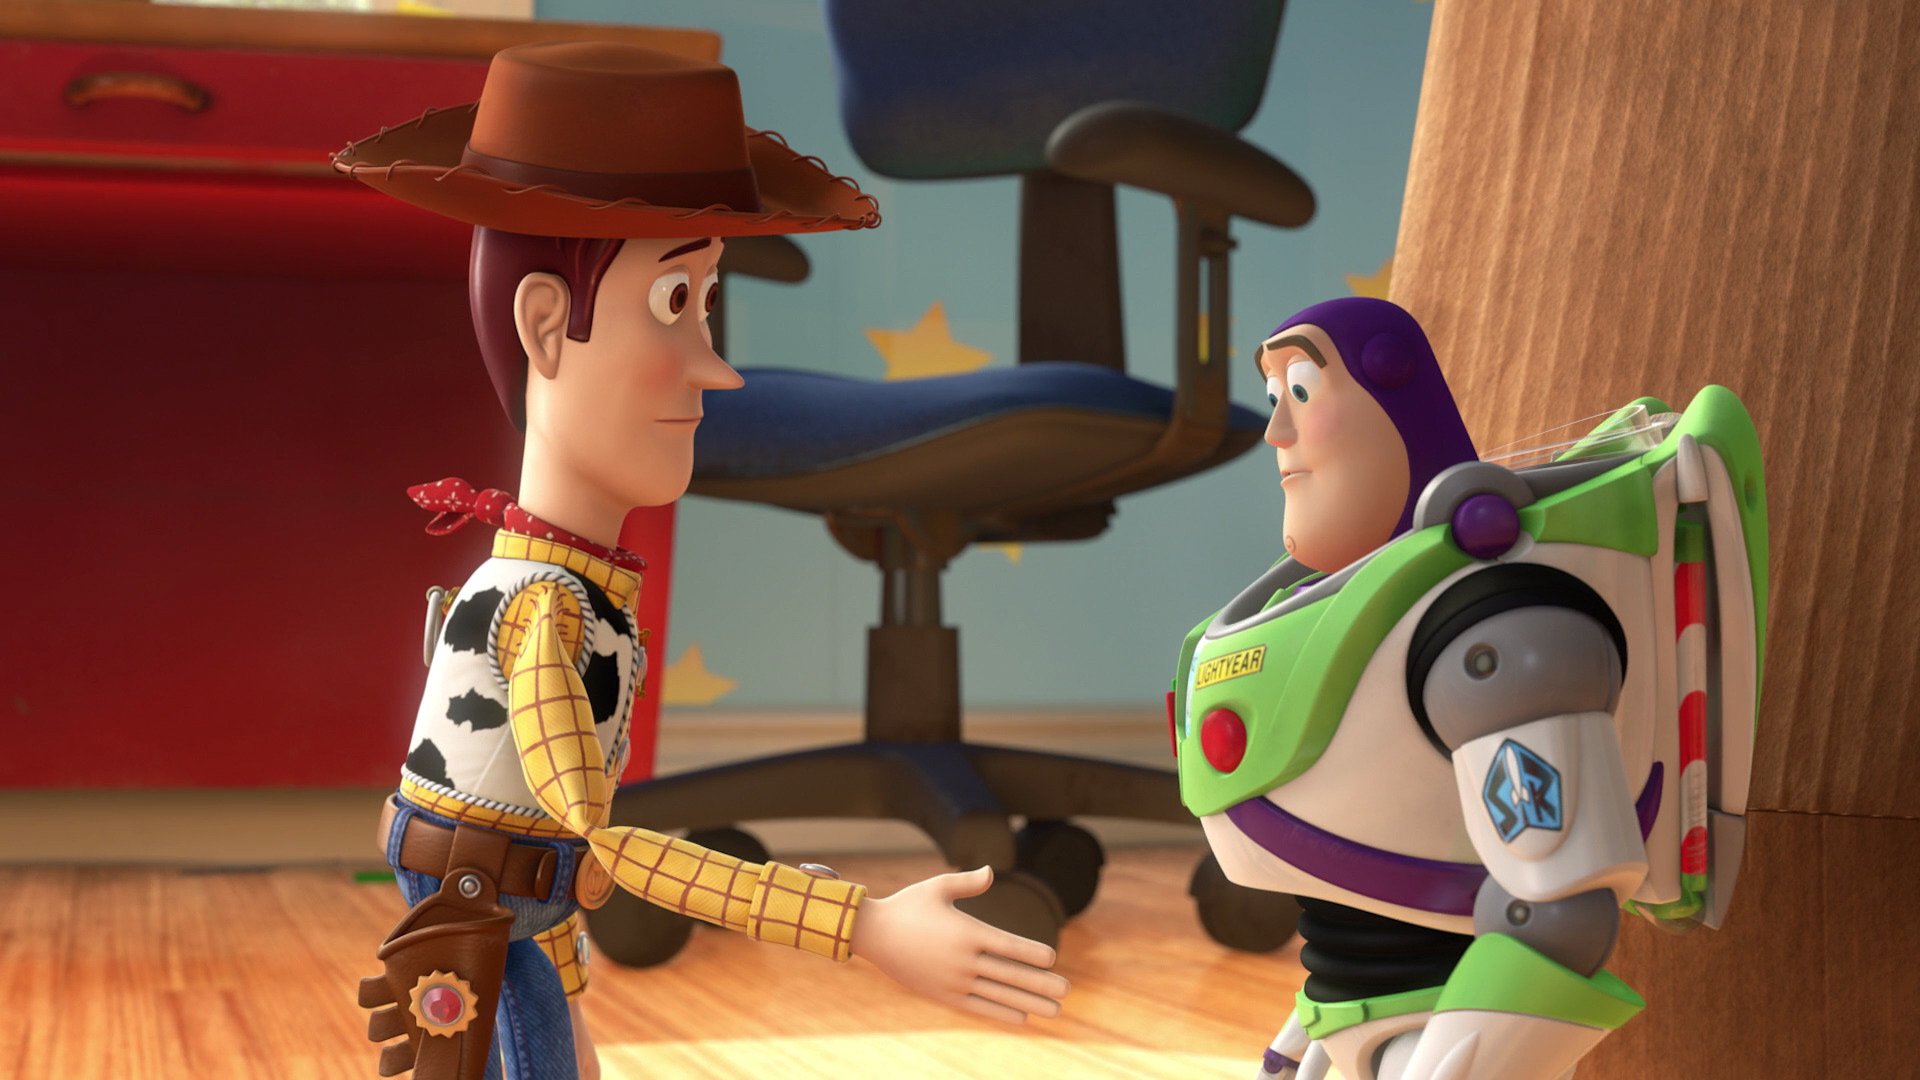 Toy Story Perfect Shots (@ToyStory_Shots) / X